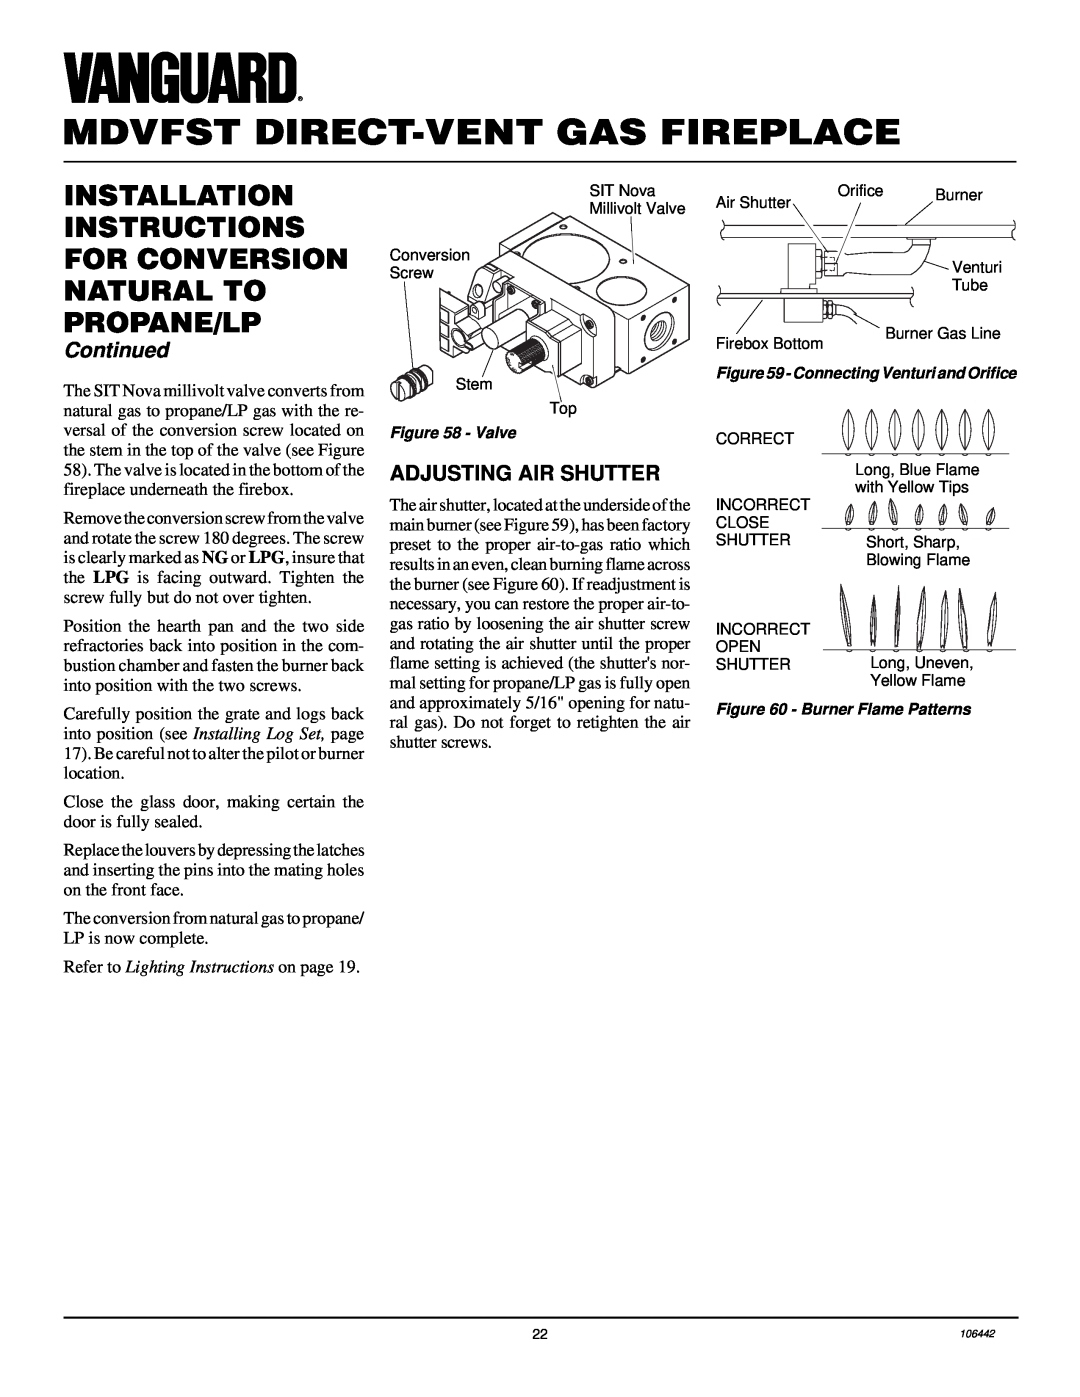 Desa MDVFST Installation Instructions, For Conversion Natural To Propane/Lp, Adjusting Air Shutter, Continued 